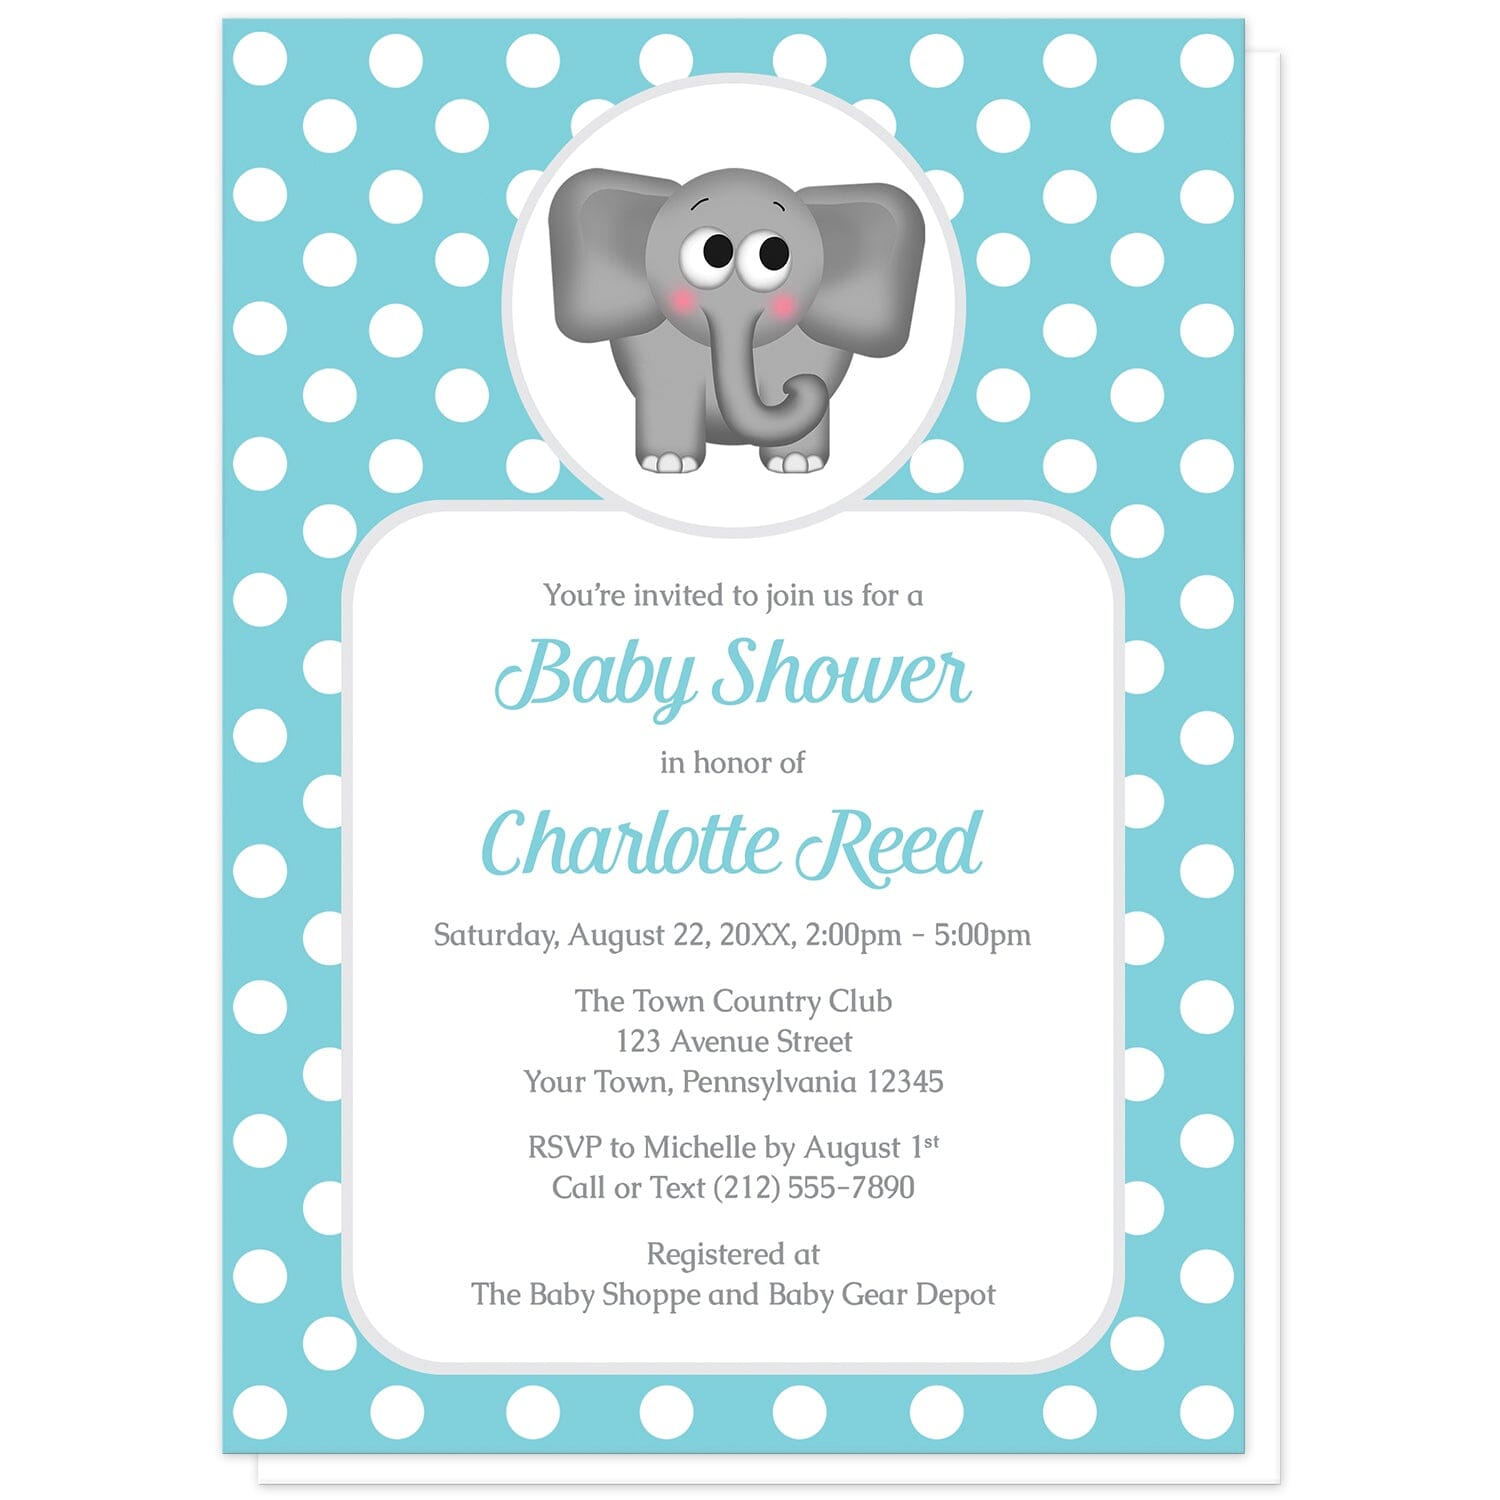 Cute Elephant Turquoise Polka Dot Baby Shower Invitations at Artistically Invited. Cute elephant turquoise polka dot baby shower invitations that are illustrated with an affectionate and adorable gray elephant over a turquoise polka dot background. Your personalized baby shower details are custom printed in turquoise and gray over a white rectangular area over the turquoise polka dot background.